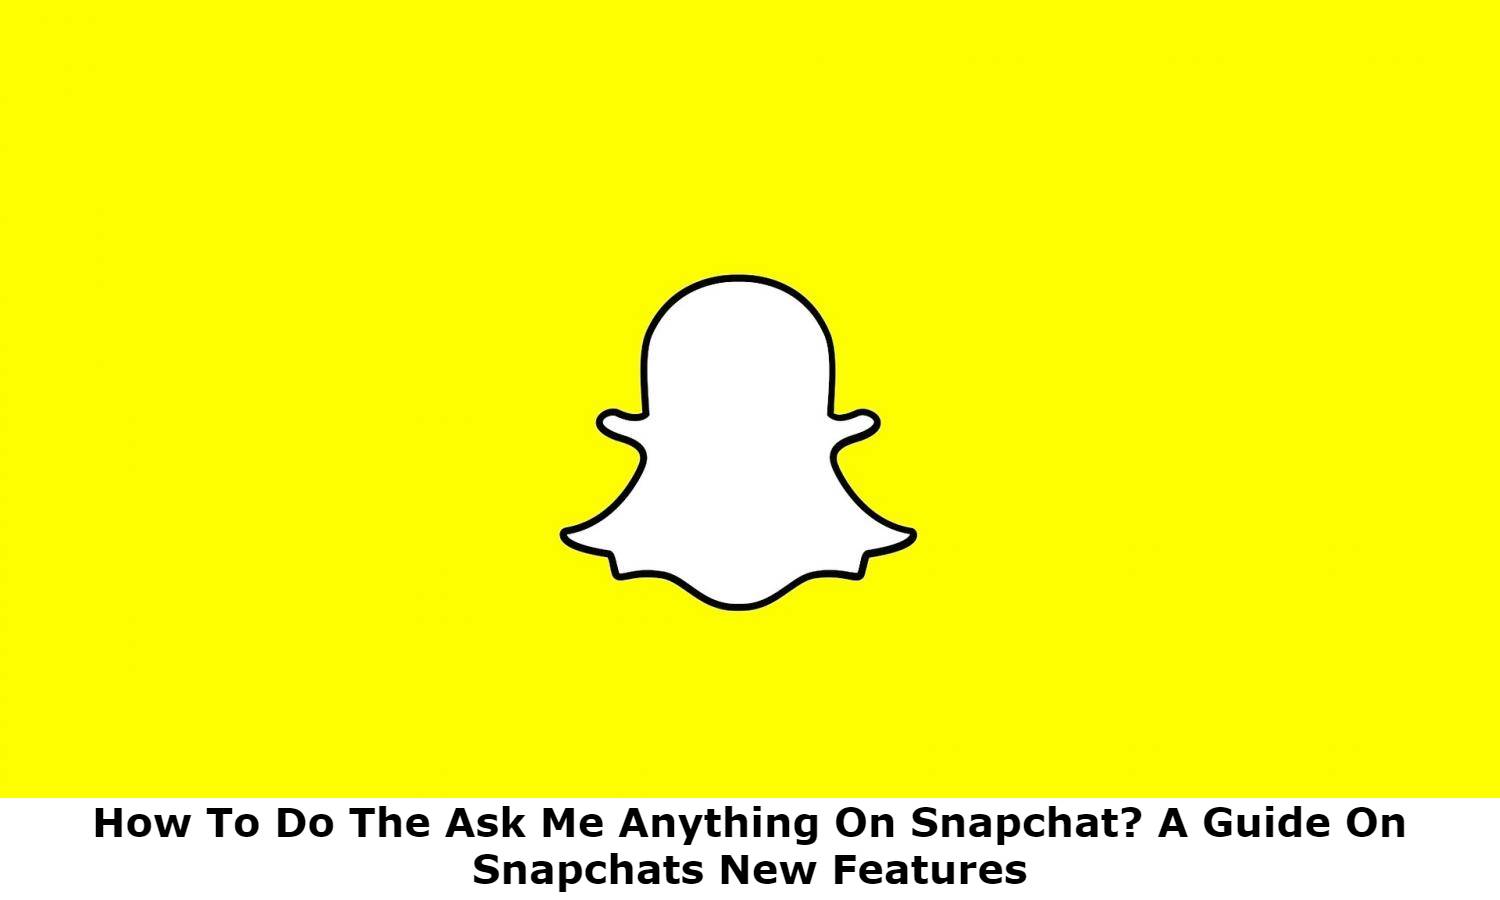 How To Do The Ask Me Anything On Snapchat(1)